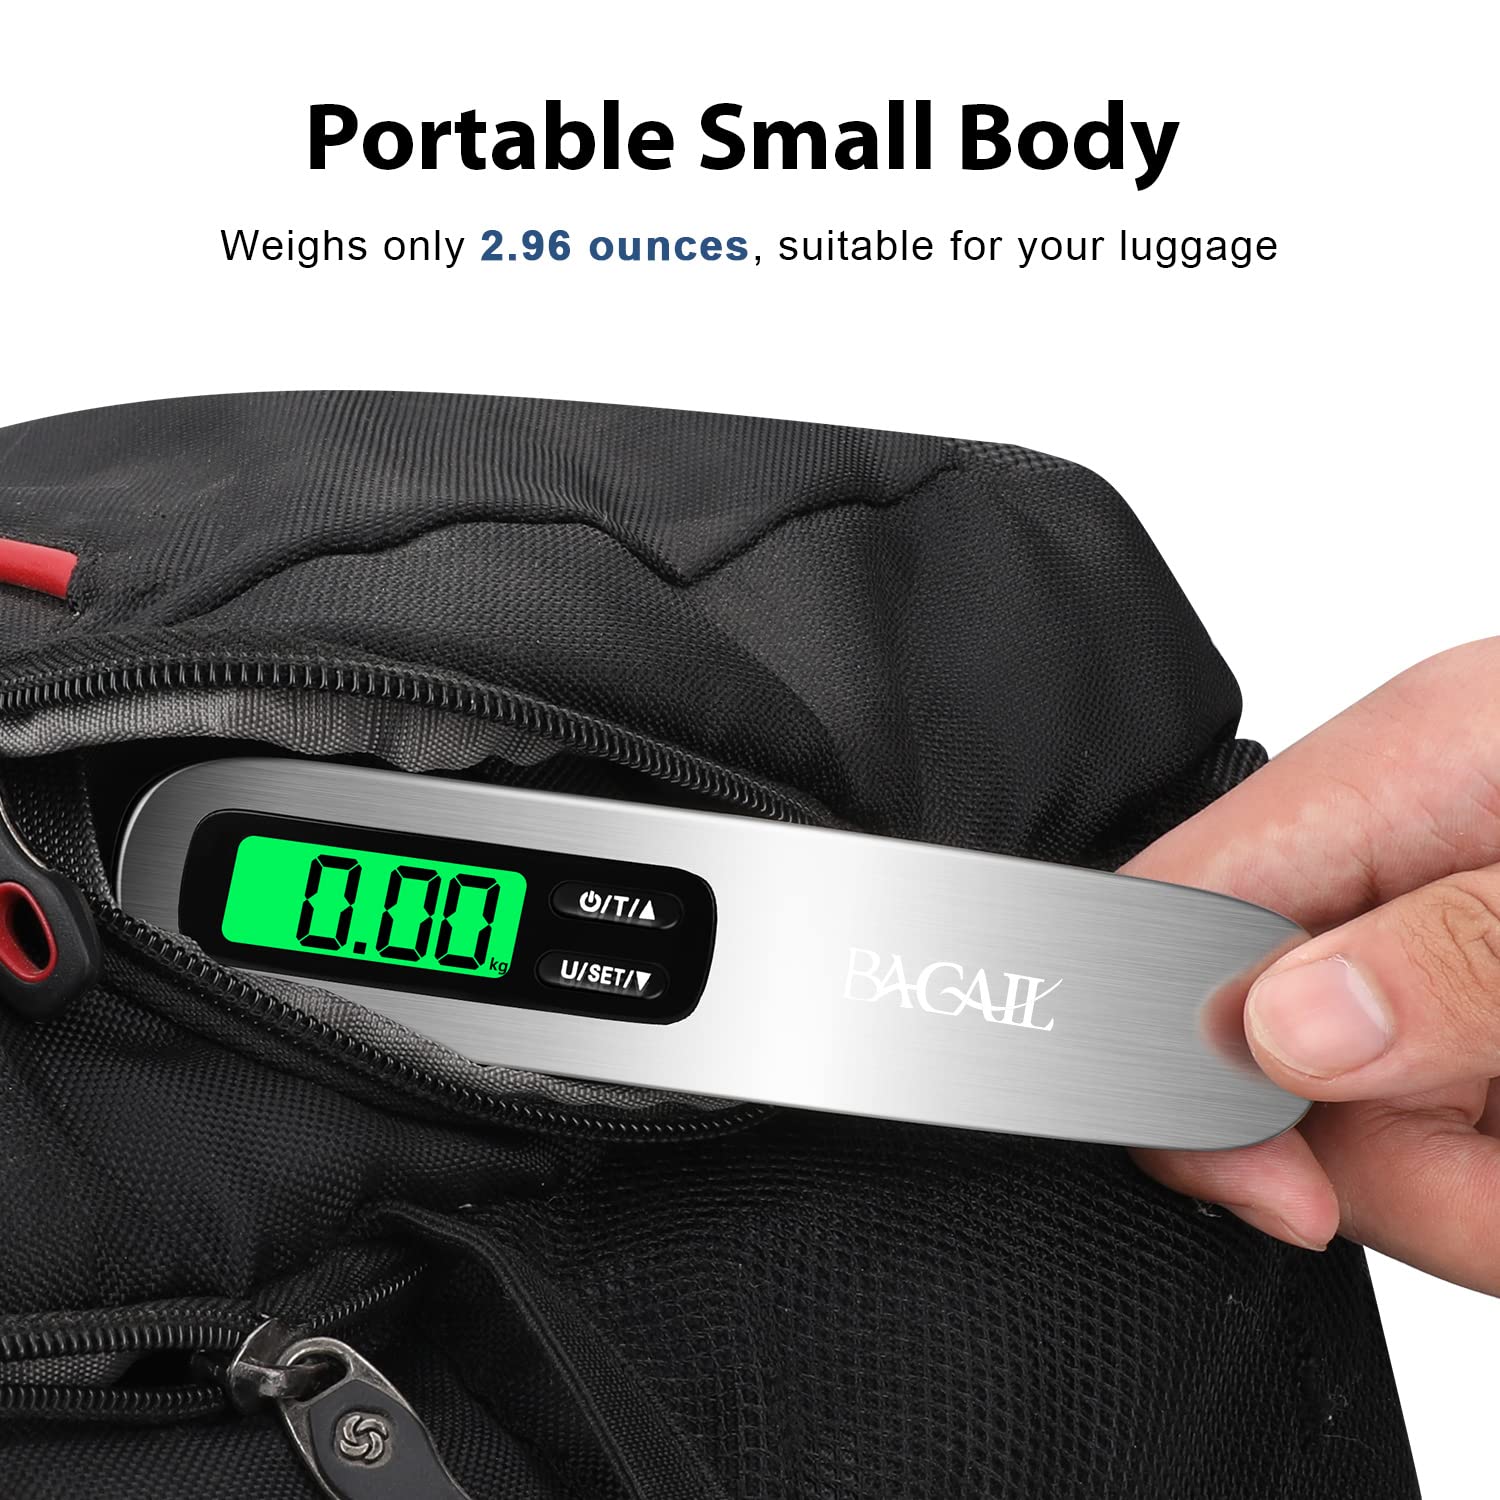 https://www.bagail.com/cdn/shop/products/bagail-digital-luggage-scale-110lbs-hanging-baggage-scale-with-backlit-lcd-display-portable-suitcase-weighing-scale-travel-luggage-weight-scale-with-hook-strong-straps-for-travelers-b_5e4bd480-04d3-4d6a-b559-e090edb0d746.jpg?v=1651827326